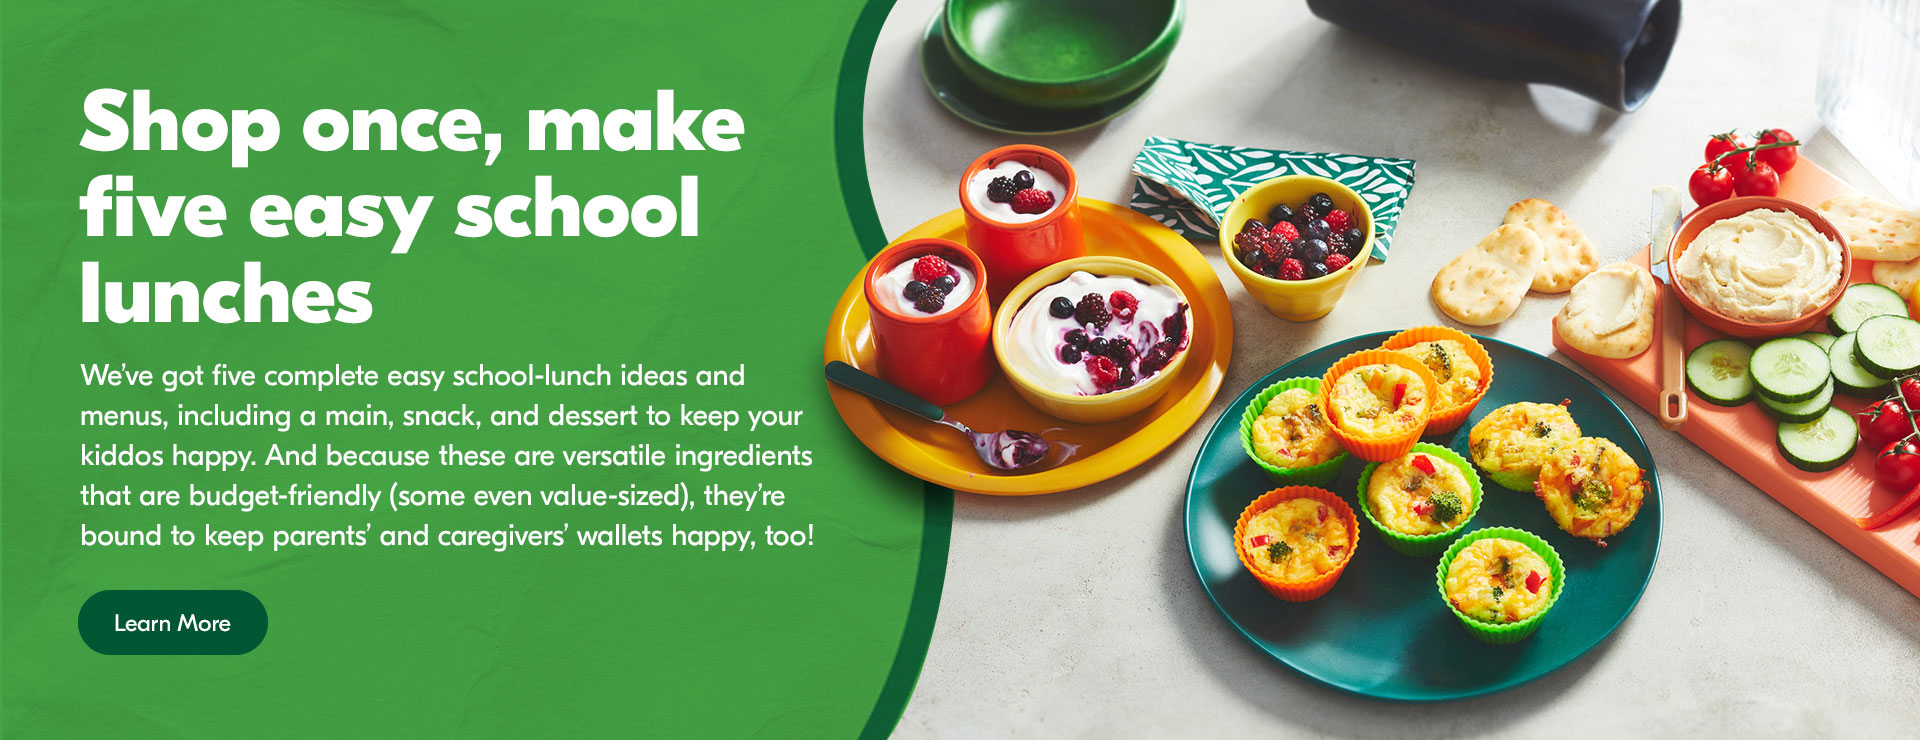 Shop once, make five easy school lunches